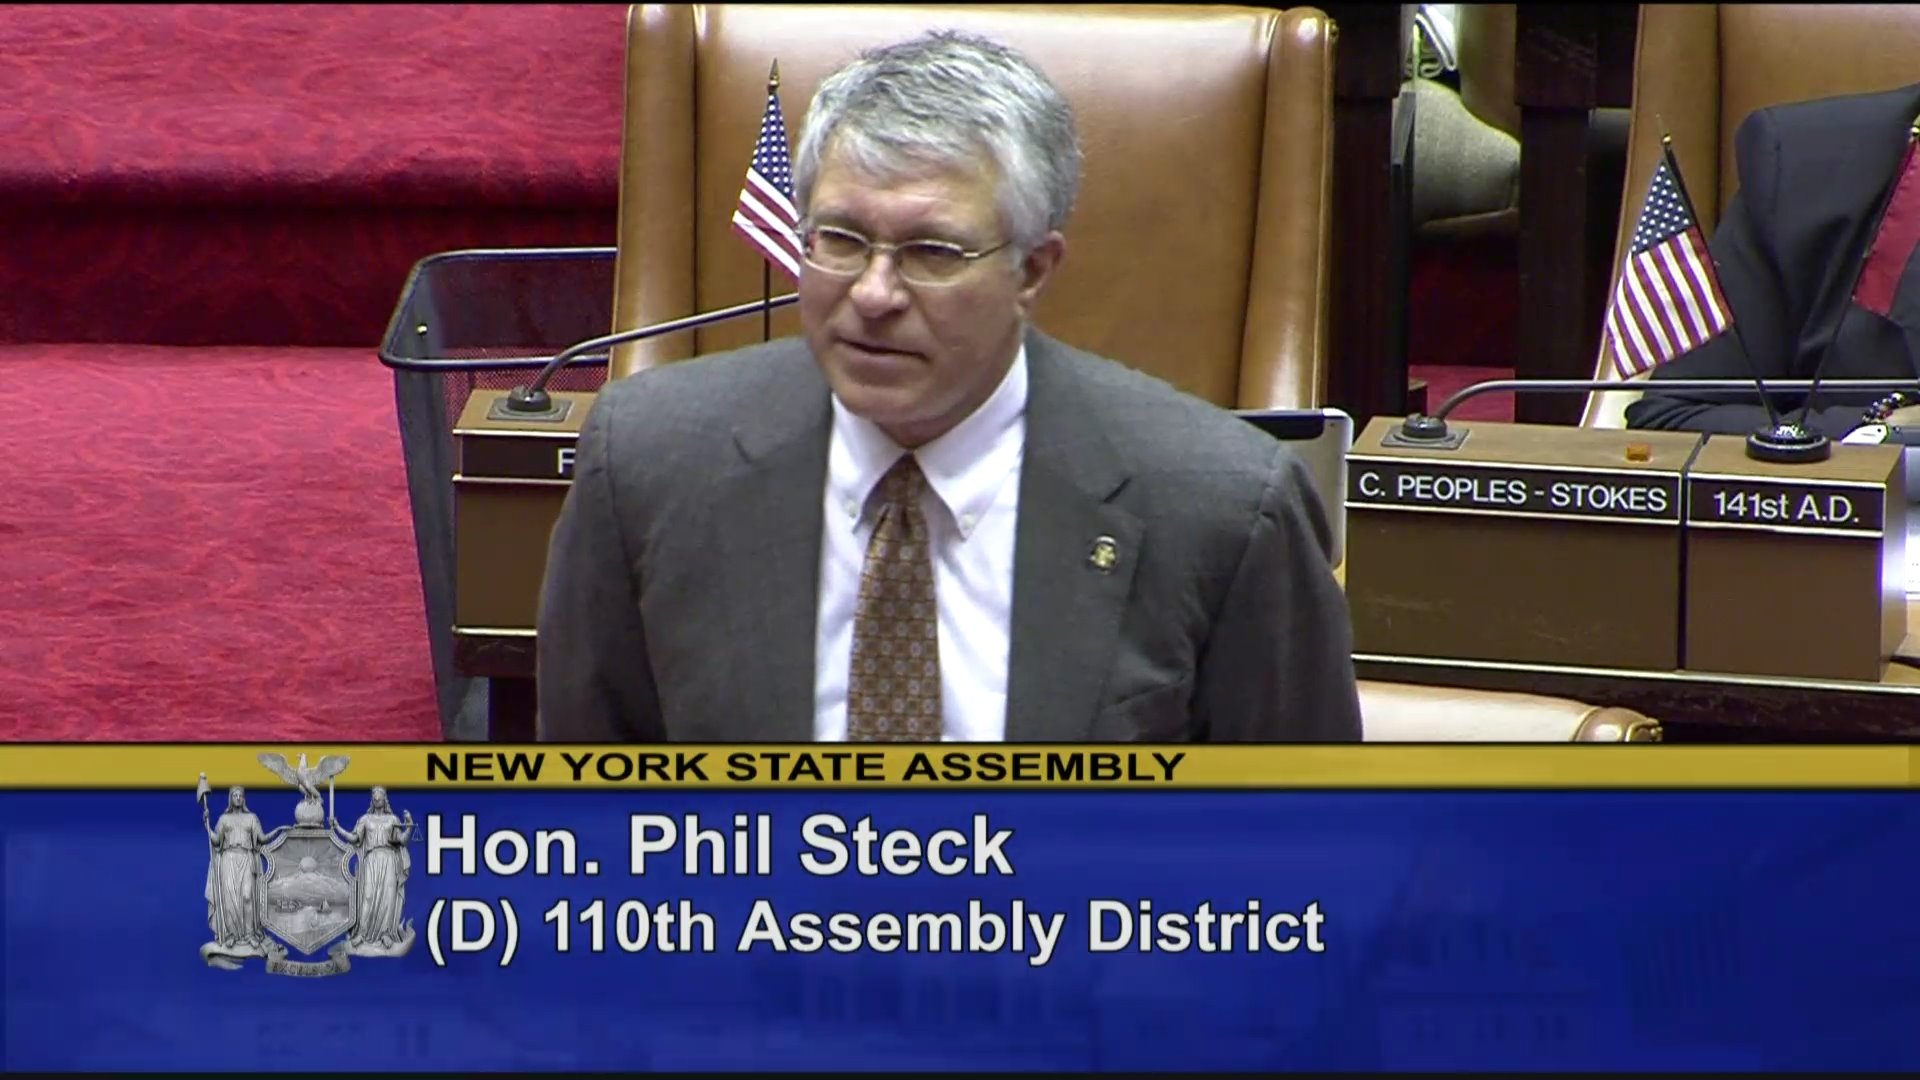 Steck Introduces Pastor Hamilton To The Assembly Chamber